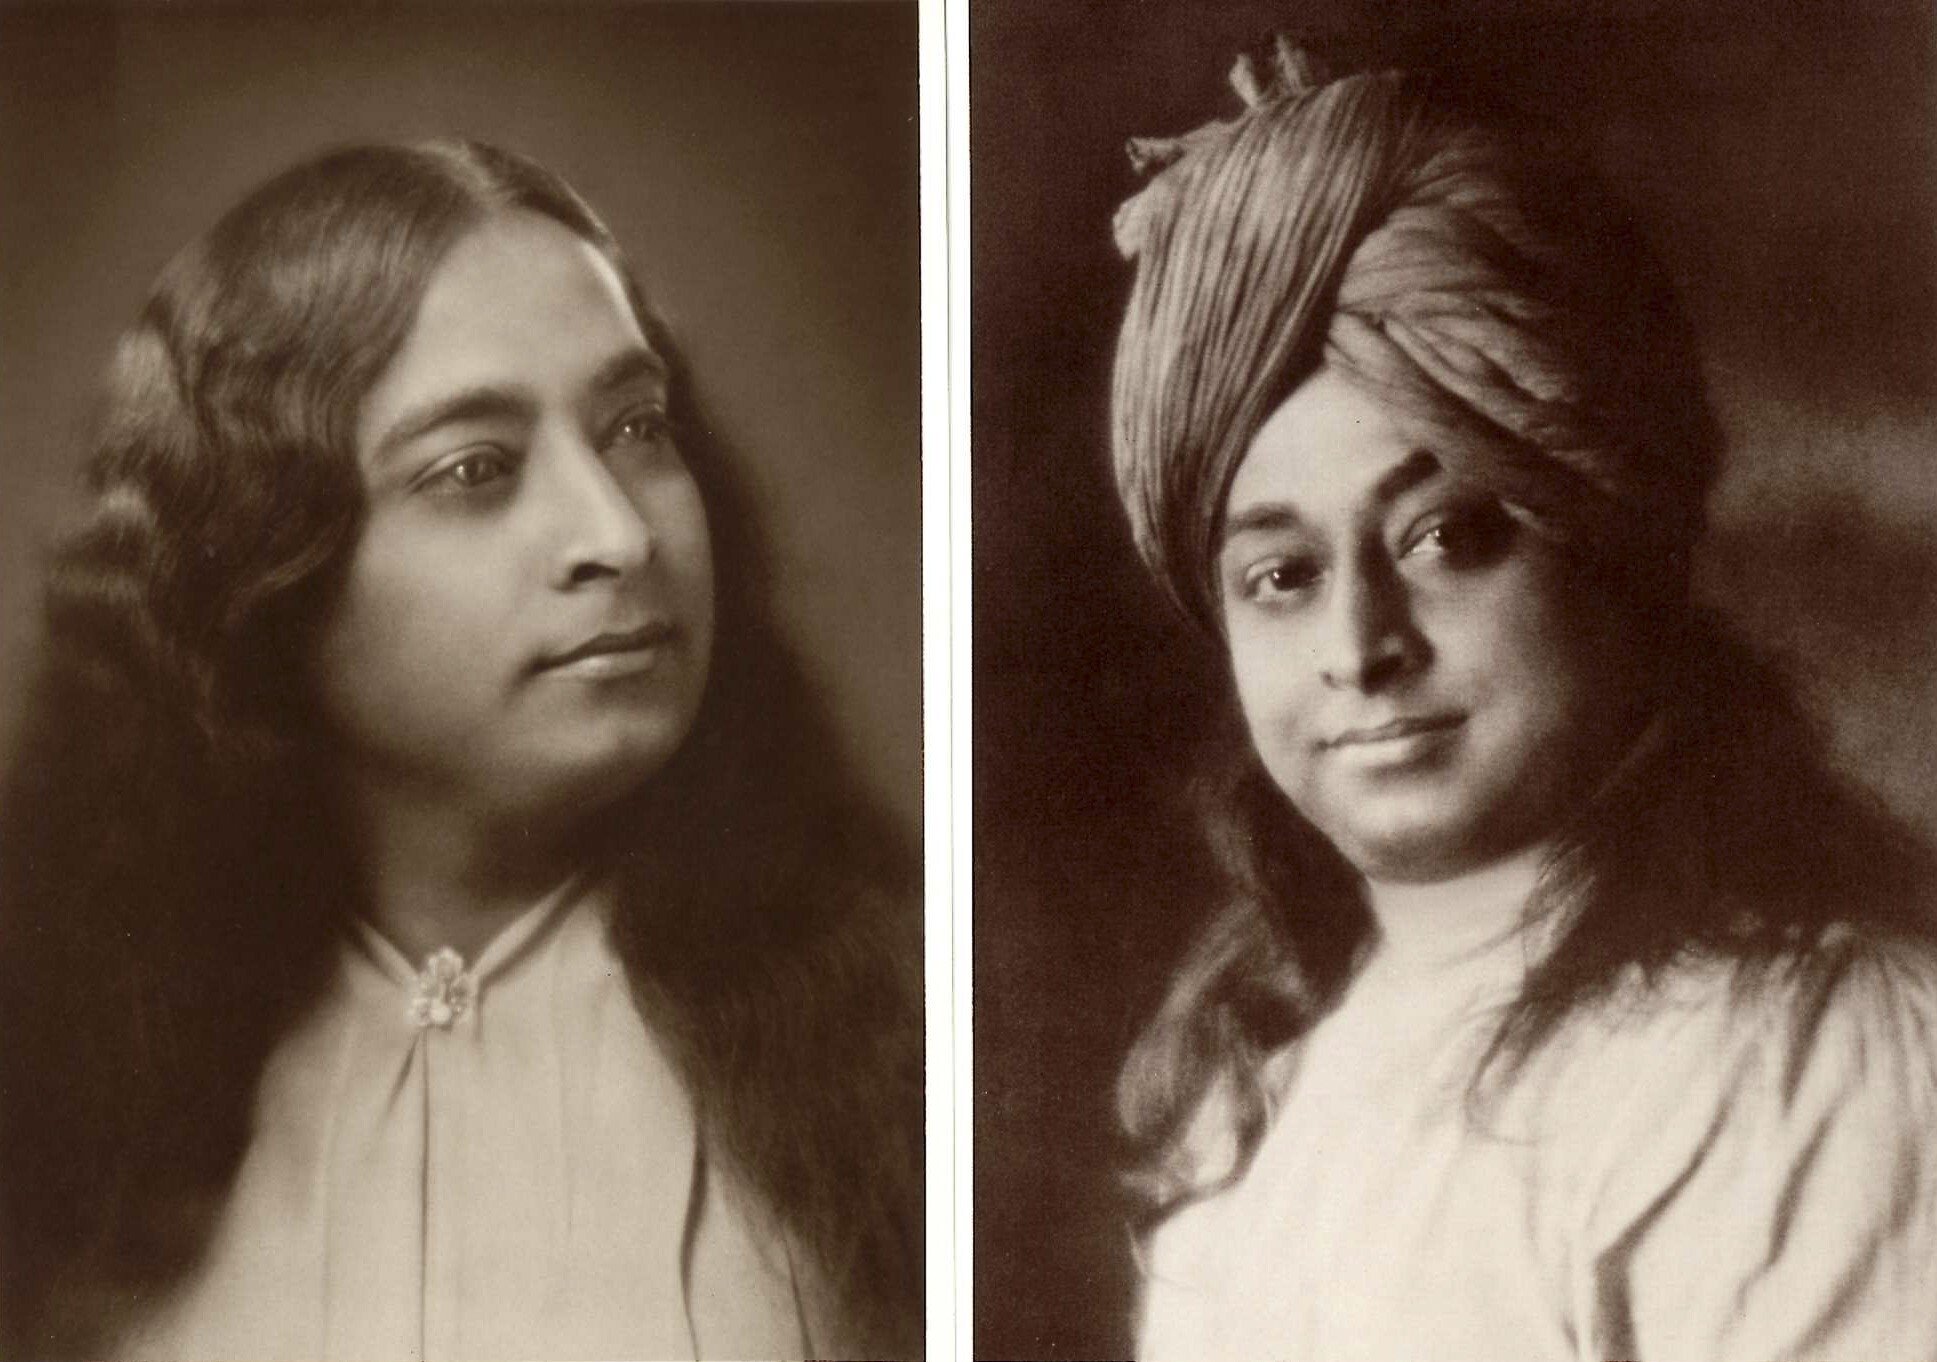 Days before he left for Boston, Paramahansa Yogananda wrote, he was visited by a mythical figure who told him to spread the message of yoga to the West. Photo: by Getty Images